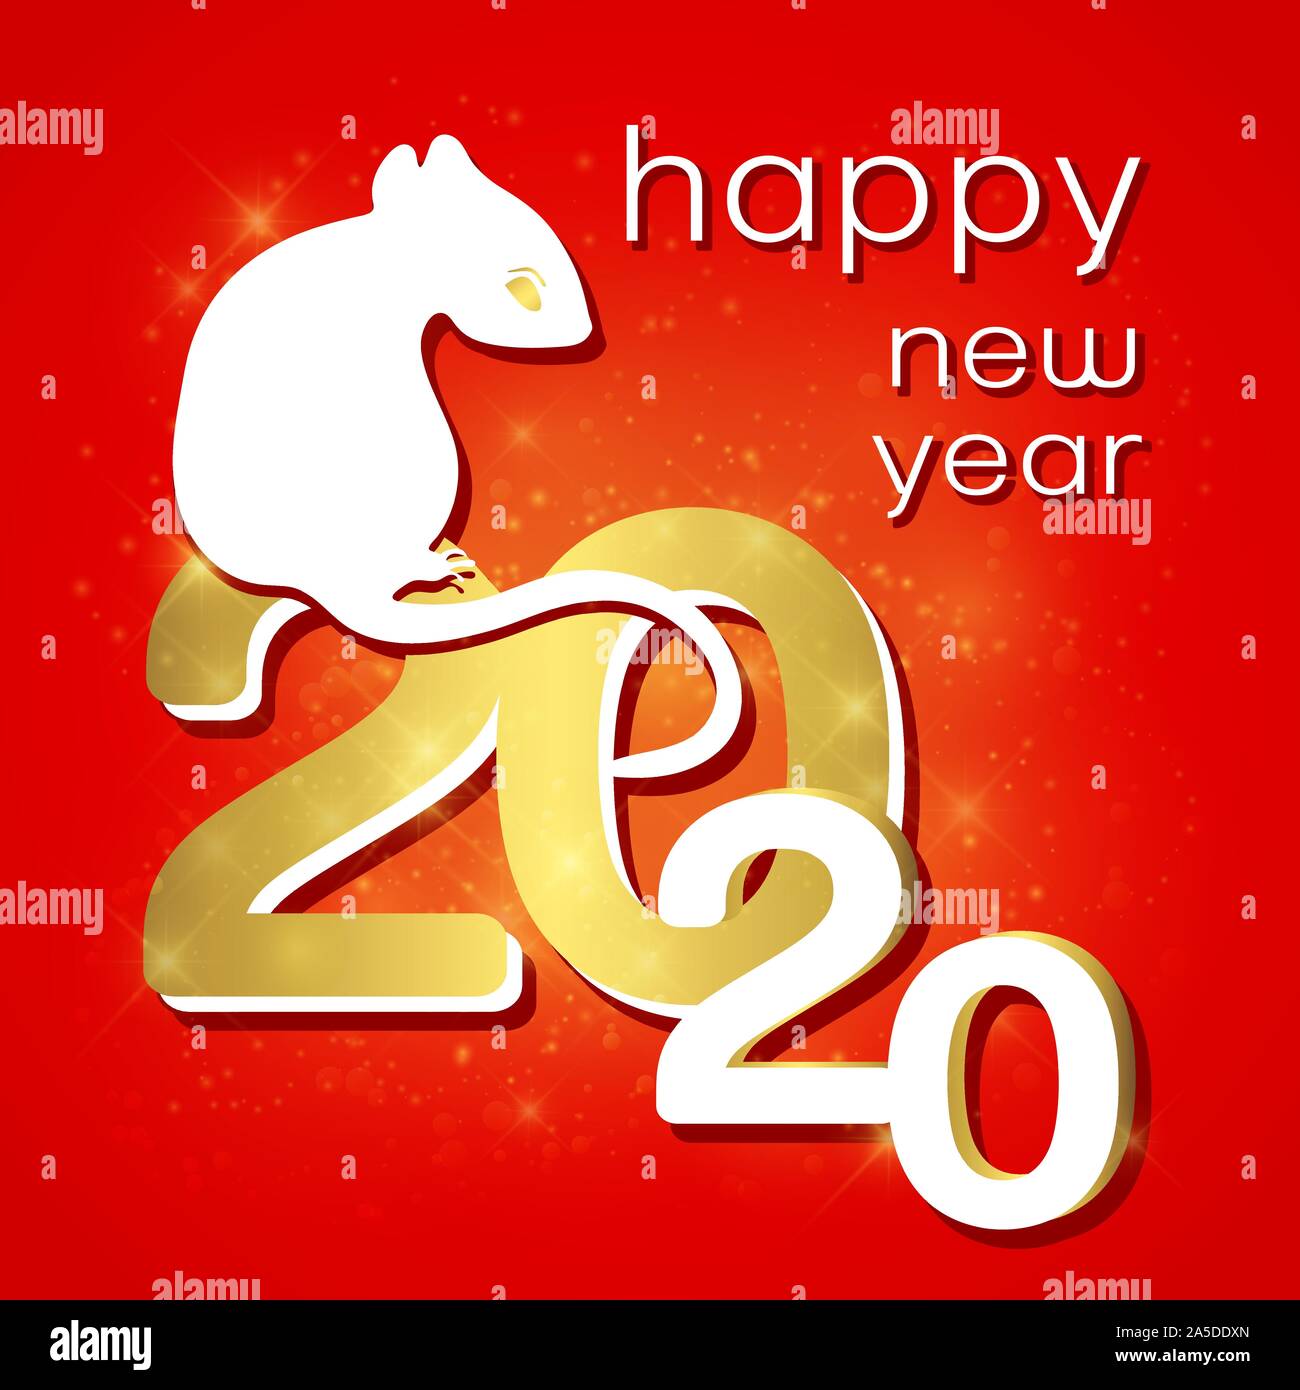 Happy New Year card , 2020 logo, icon, symbol of the year according to the eastern Chinese calendar, congratulatory banner, vector illustration. White Stock Vector